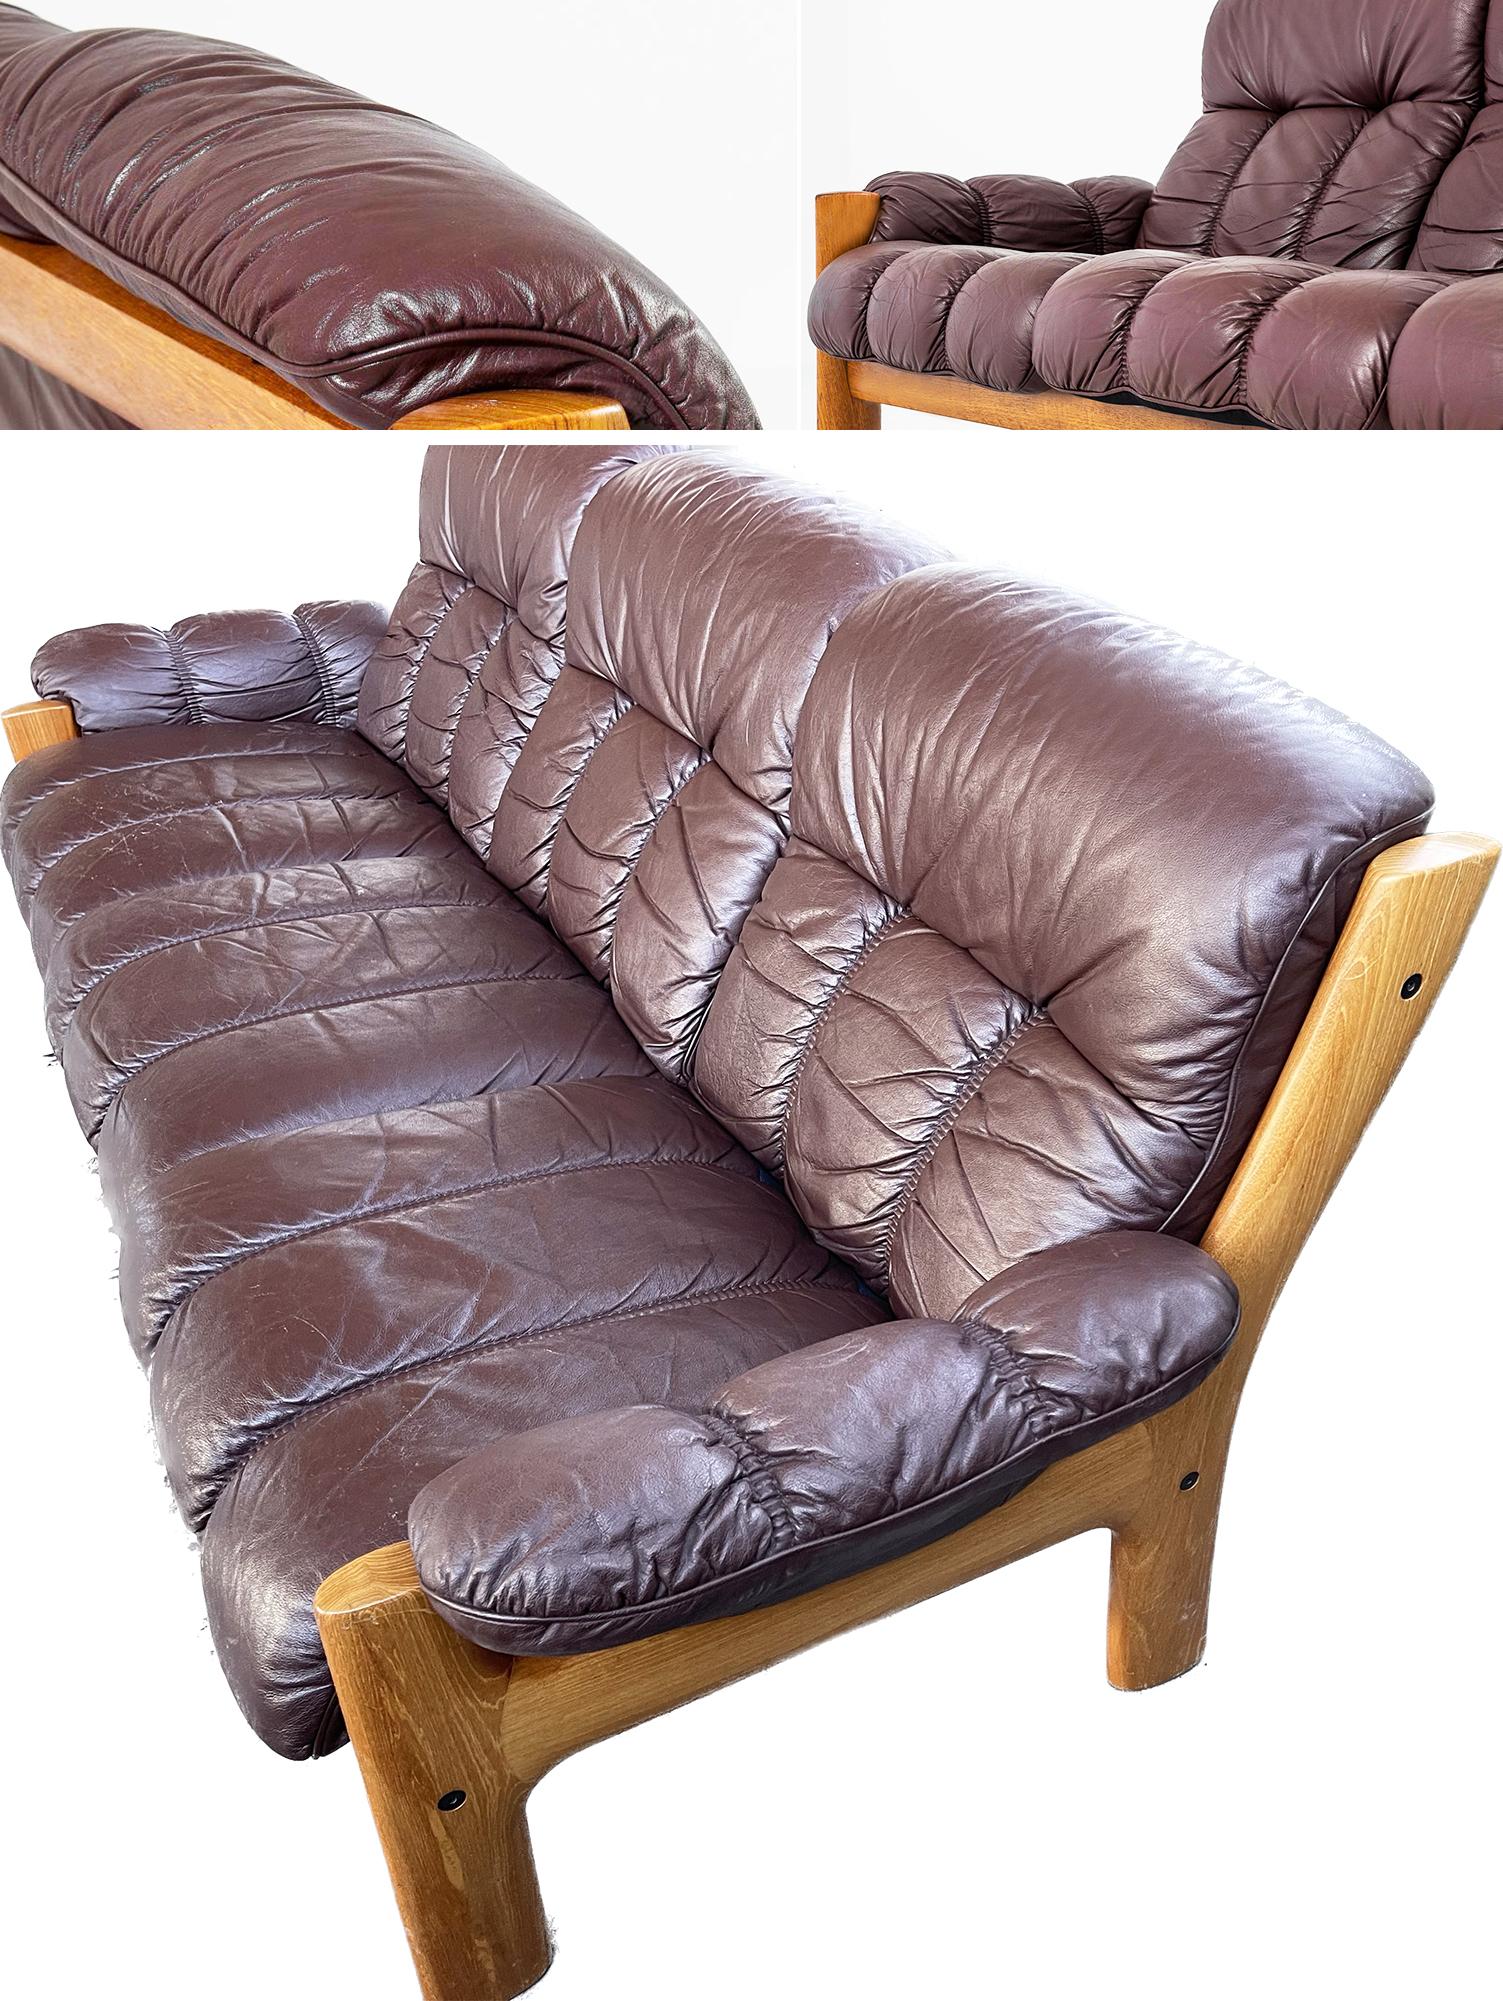 Beautiful vintage 1970s Ekornes Mid-Century Modern Teak and leather sofa in excellent vintage condition. This beautiful sculptural sofa has been kept in an extra room of the collector's home, and is in fantastic condition throughout. The leather is